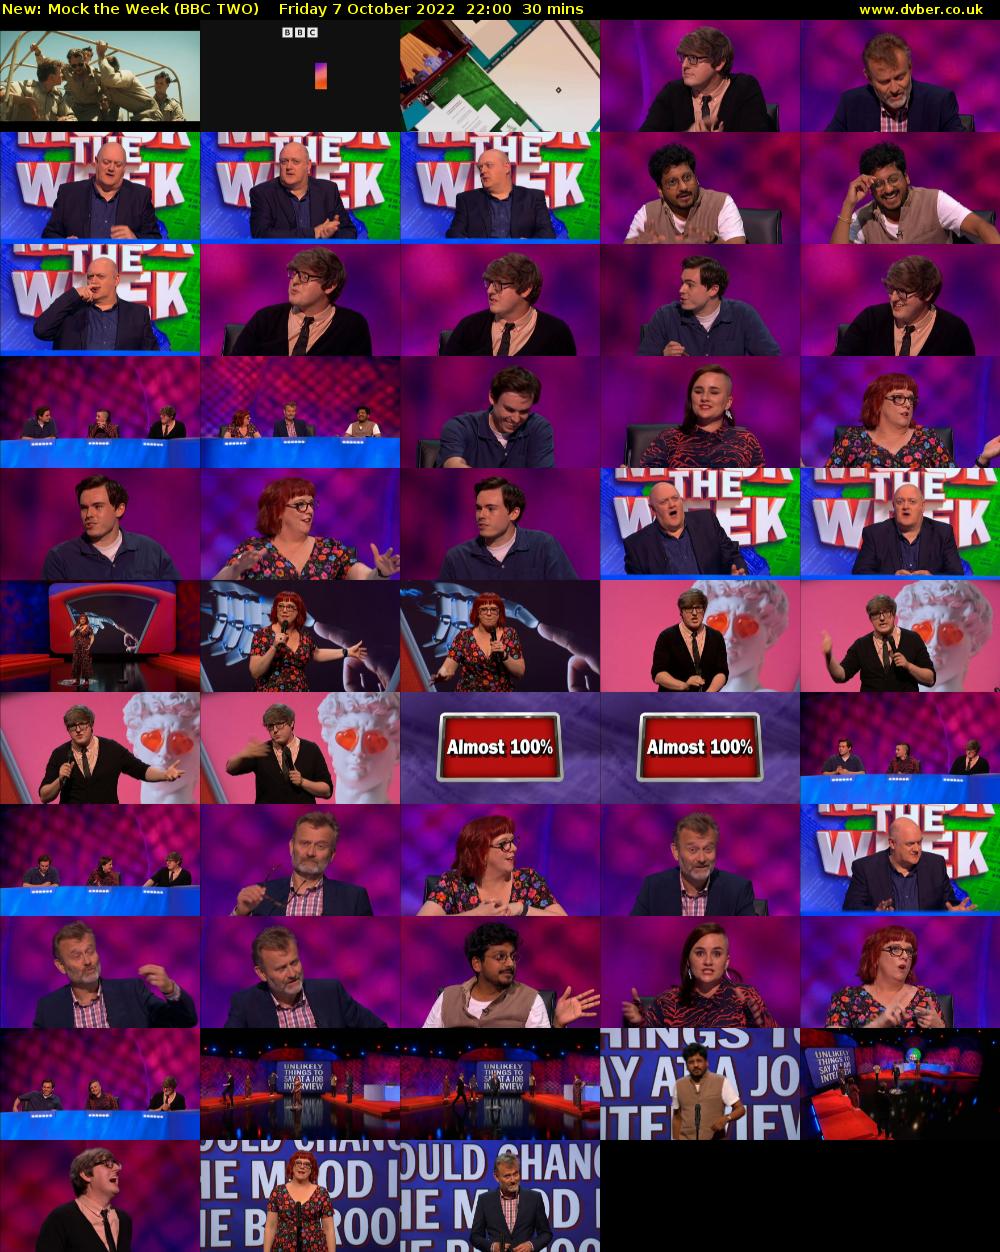 Mock the Week (BBC TWO) Friday 7 October 2022 22:00 - 22:30